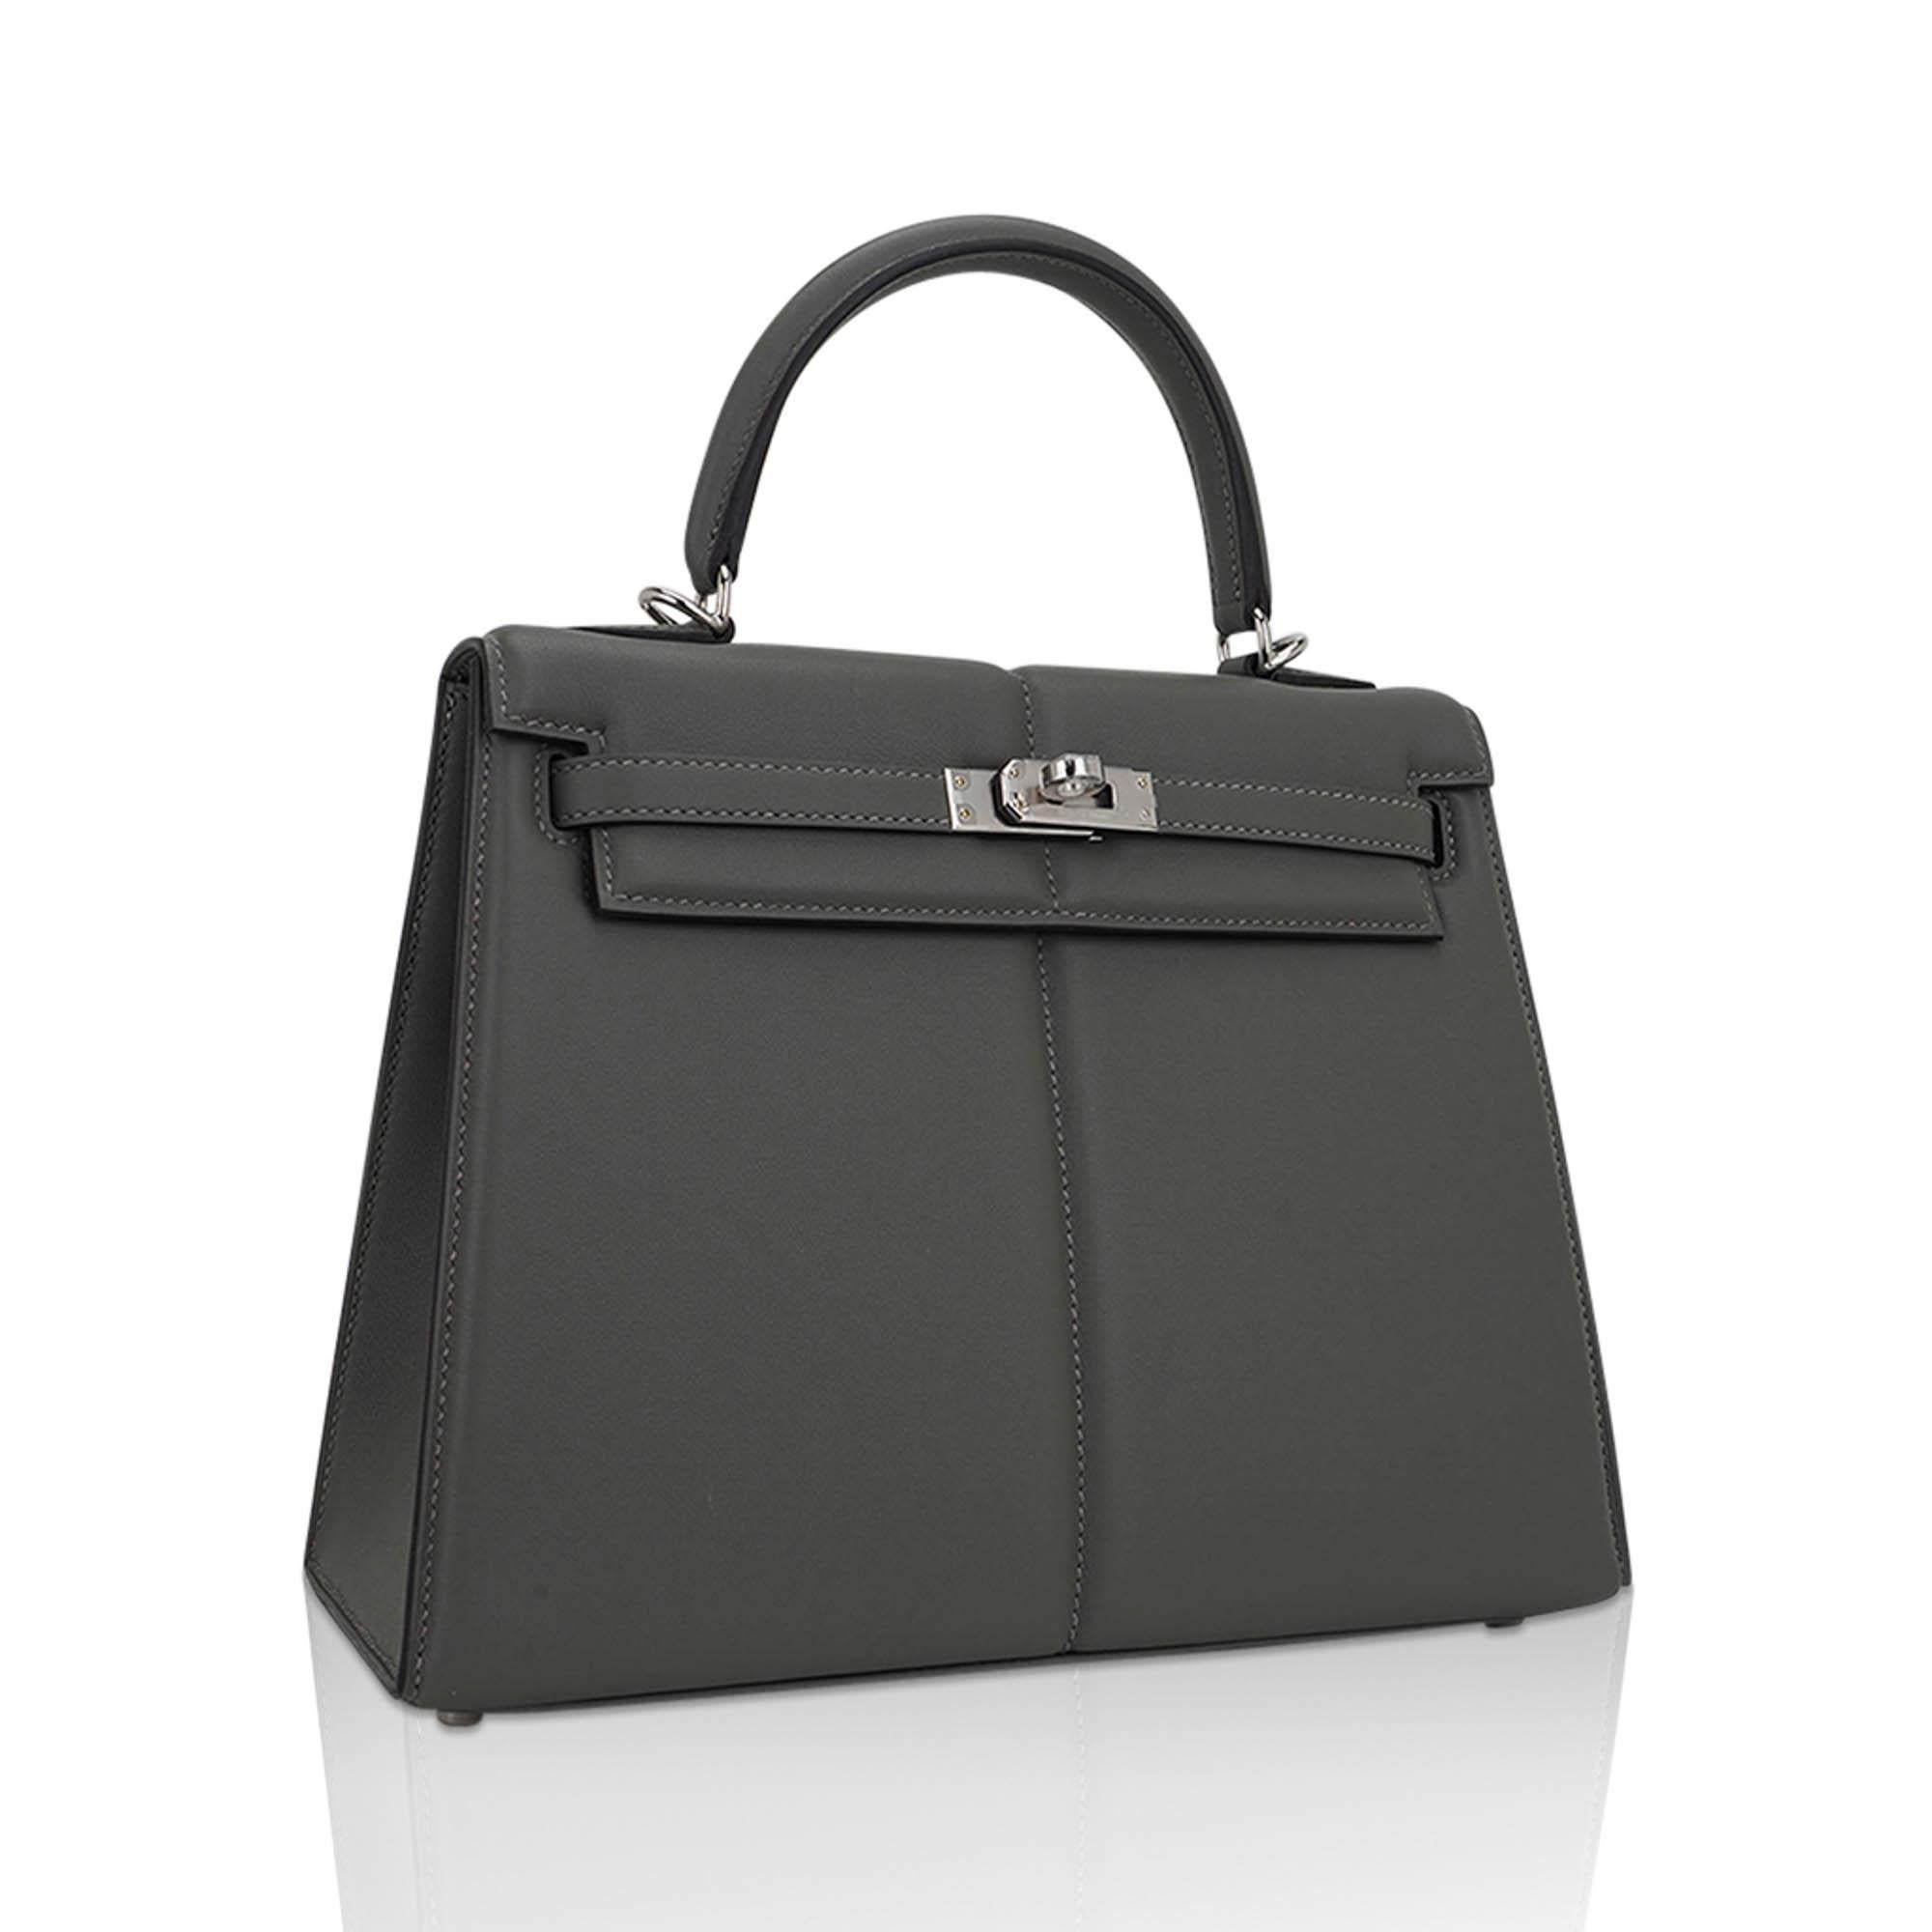 Mightychic offers an Hermes Padded Kelly 25 bag featured in Gris Meyer.
This rare limited edition Hermes Kelly bag has tone on tone saddle stitching to help accentuate the gently padded panels.
The spirit of travel has always influenced Hermes and